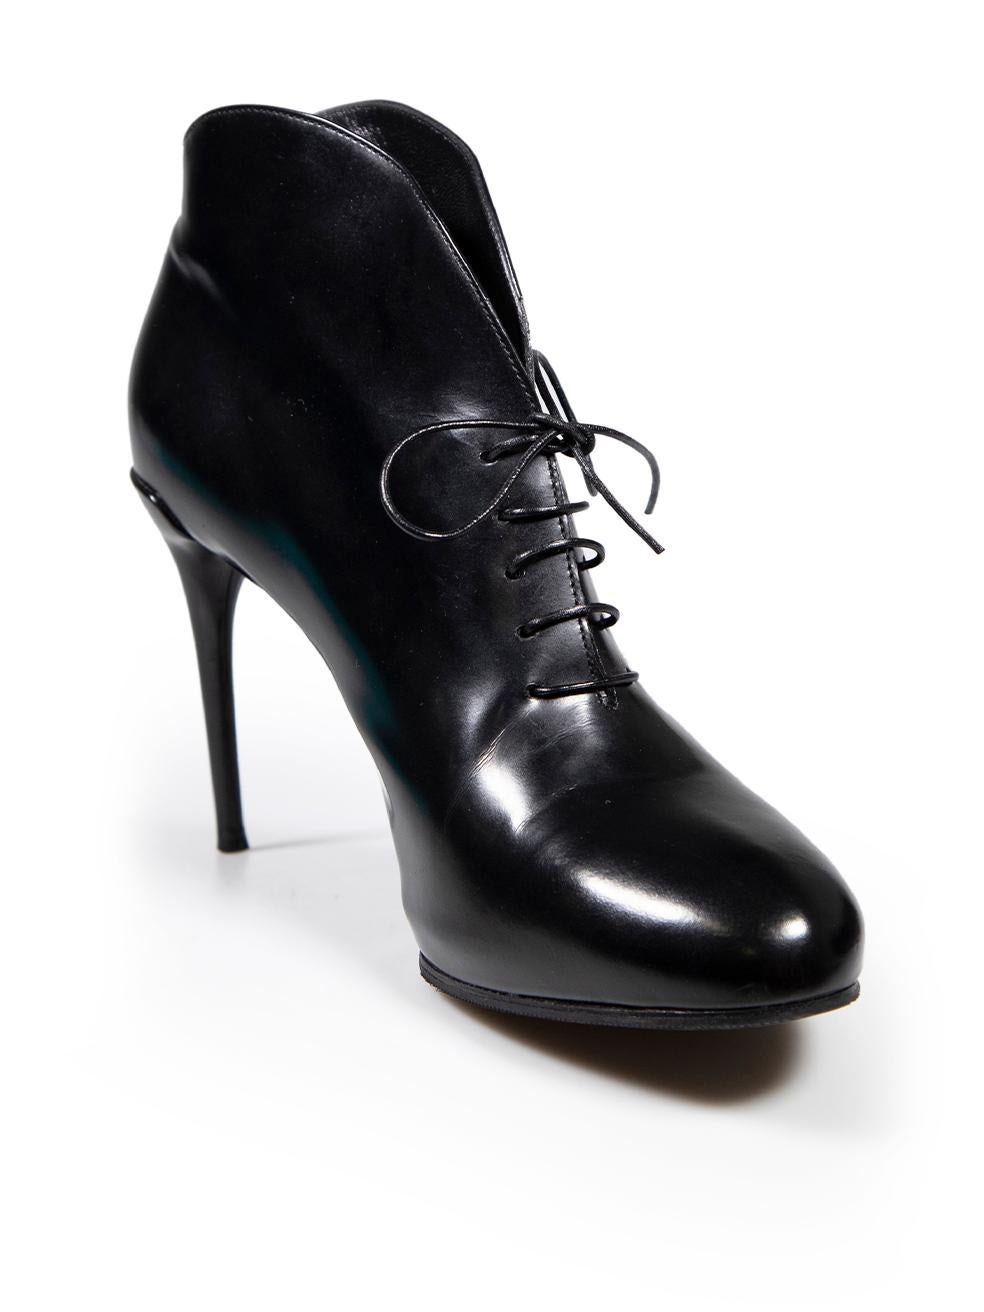 CONDITION is Very good. Hardly any visible wear to boots is evident on this used Gucci designer resale item.
 
 Details
 Model: Kim
 Black
 Leather
 Ankle boots
 High heeled
 Almond toe
 Lace up fastening
 Curved edge
 
 
 Made in Italy
 
